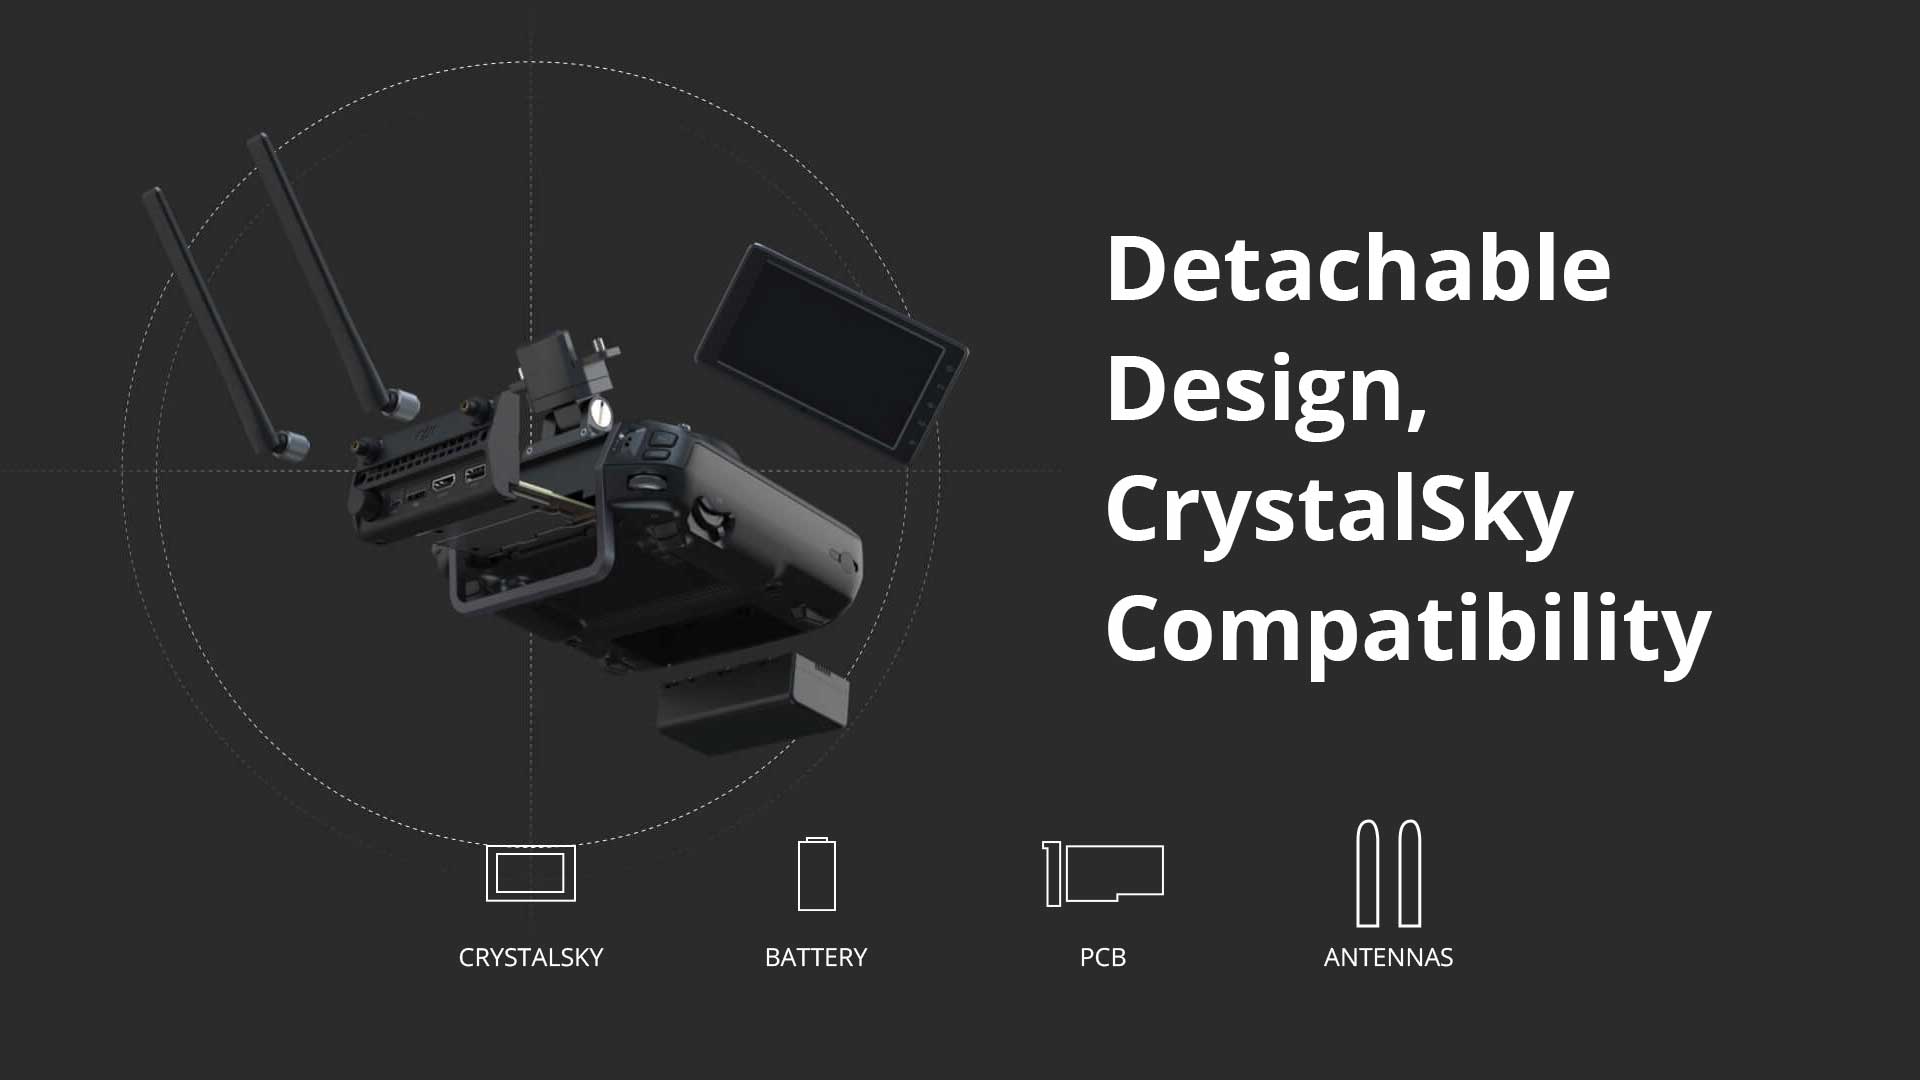 DJI Cendence Remote Controller Detachable Design and CrystalSky Compatibility